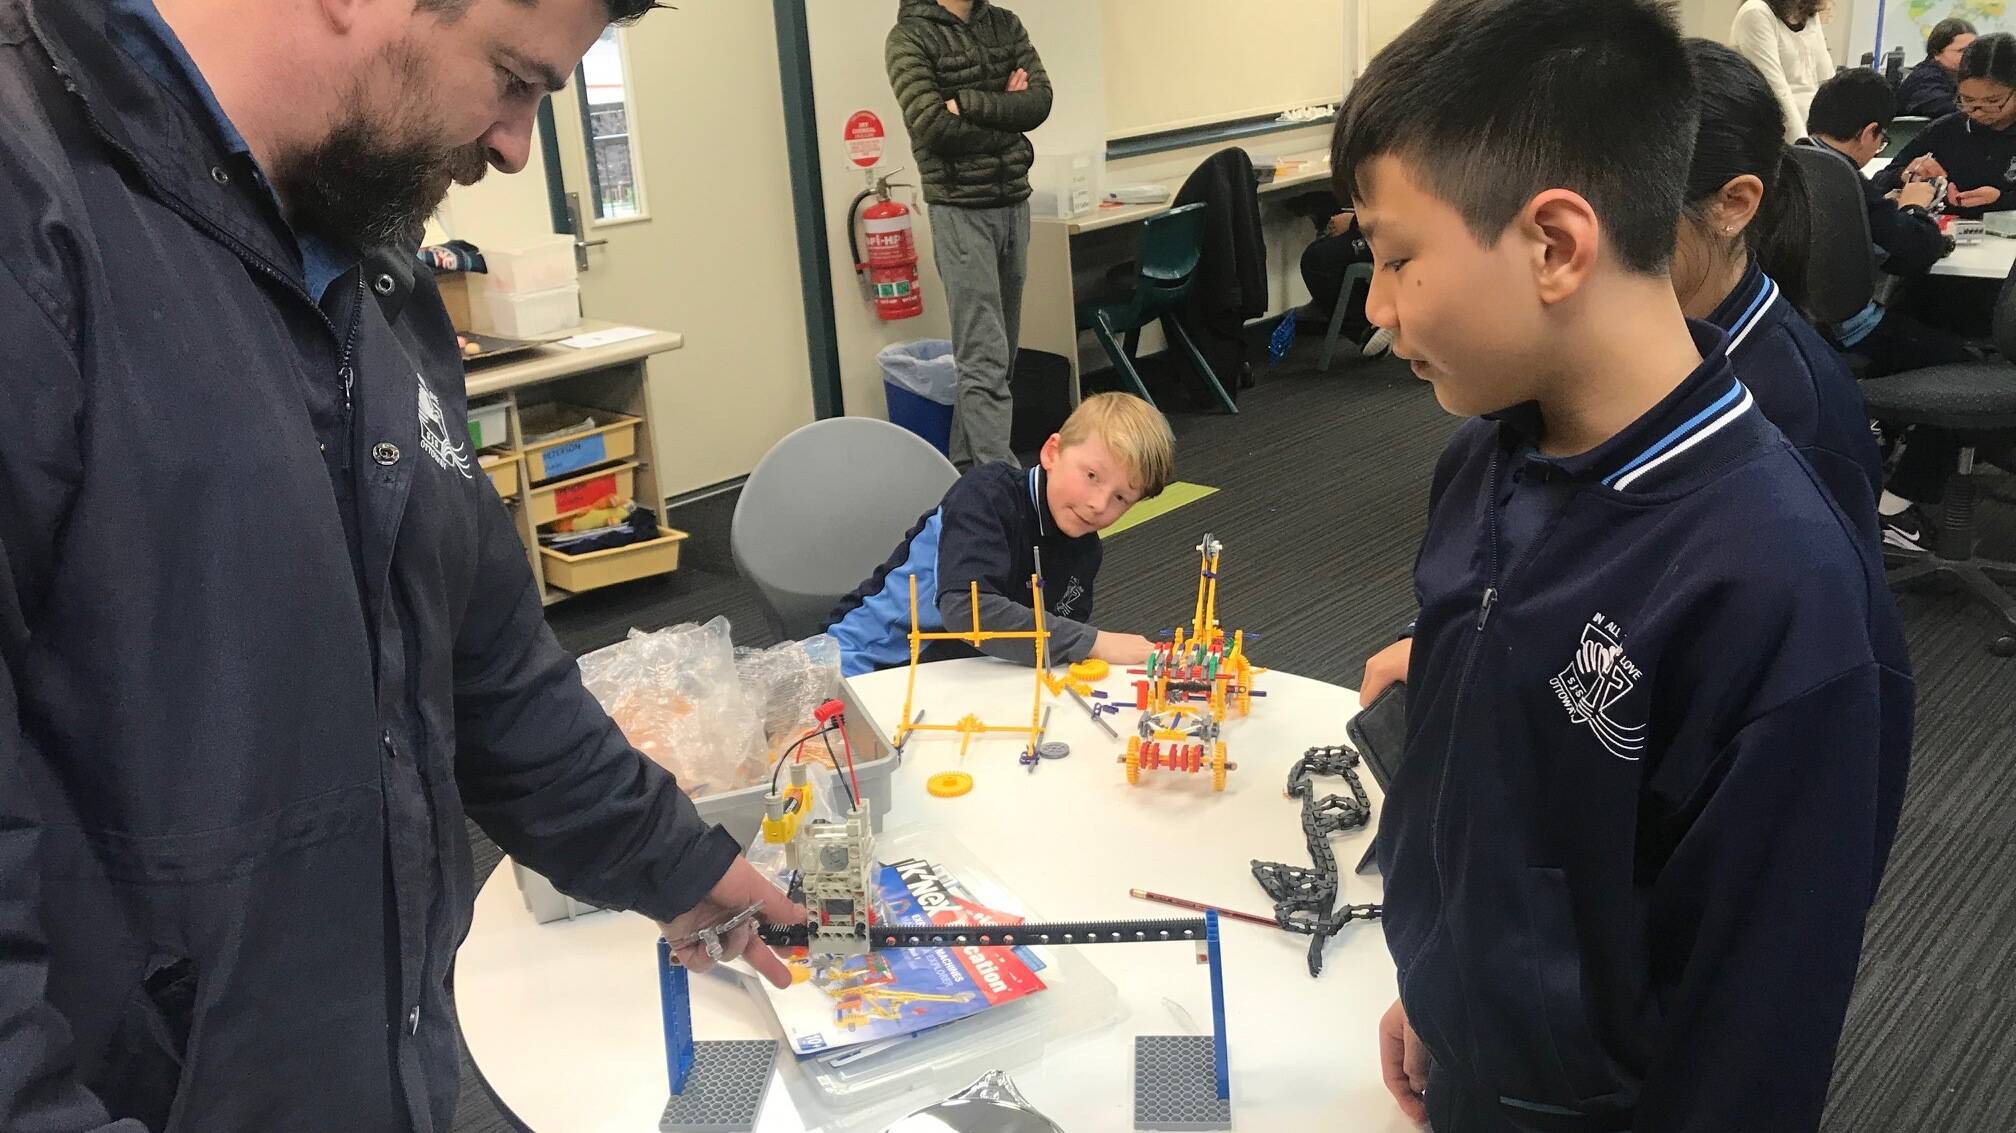 Students at the school now have the opportunity to participate in hands-on, interactive STEM learning utilising a range of equipment and resources such as science construction kits, maths equipment, Lego Mindstorm robotic kits and Spheros.